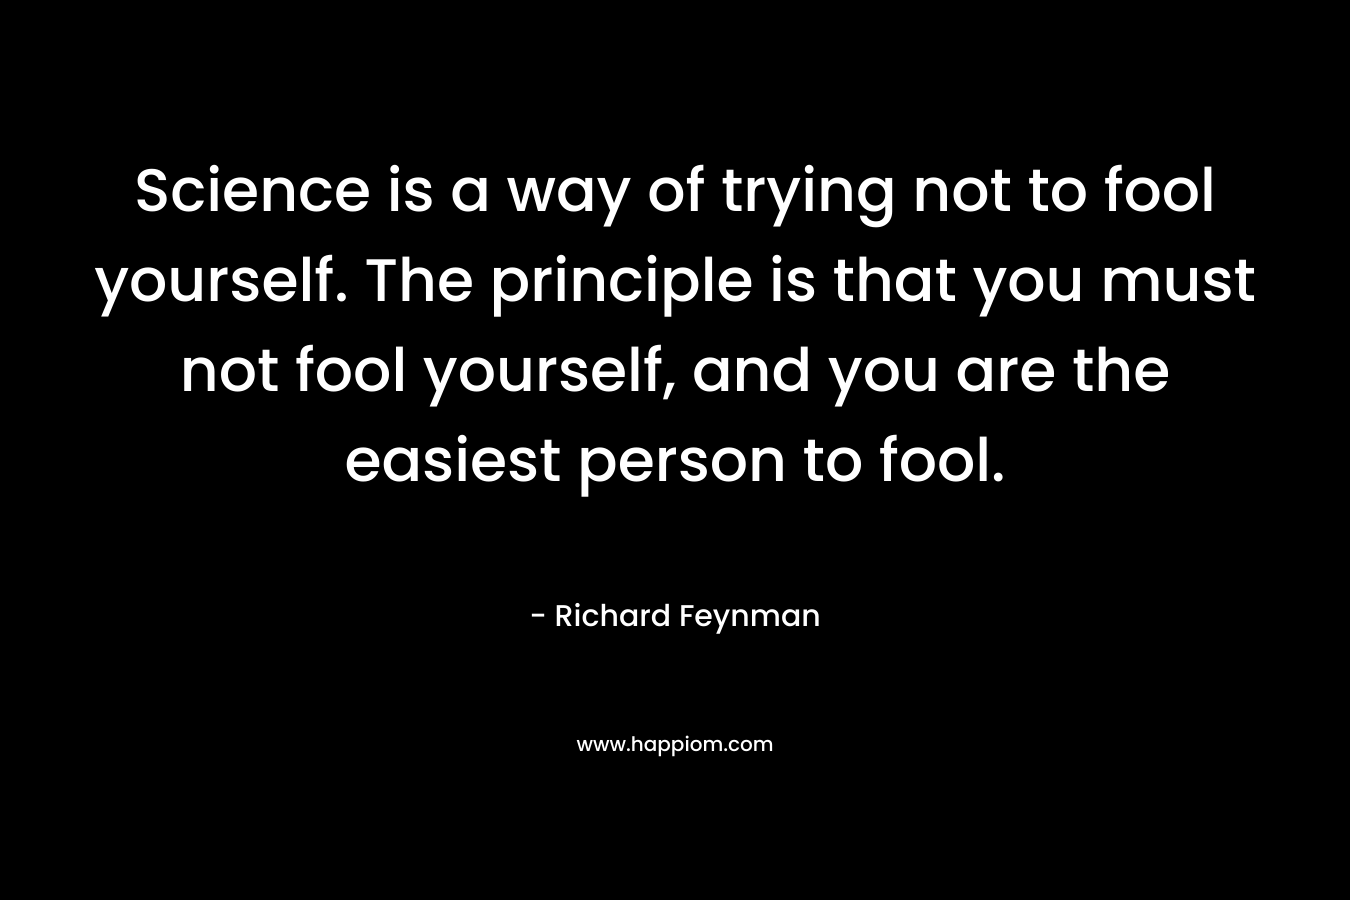 Science is a way of trying not to fool yourself. The principle is that you must not fool yourself, and you are the easiest person to fool.